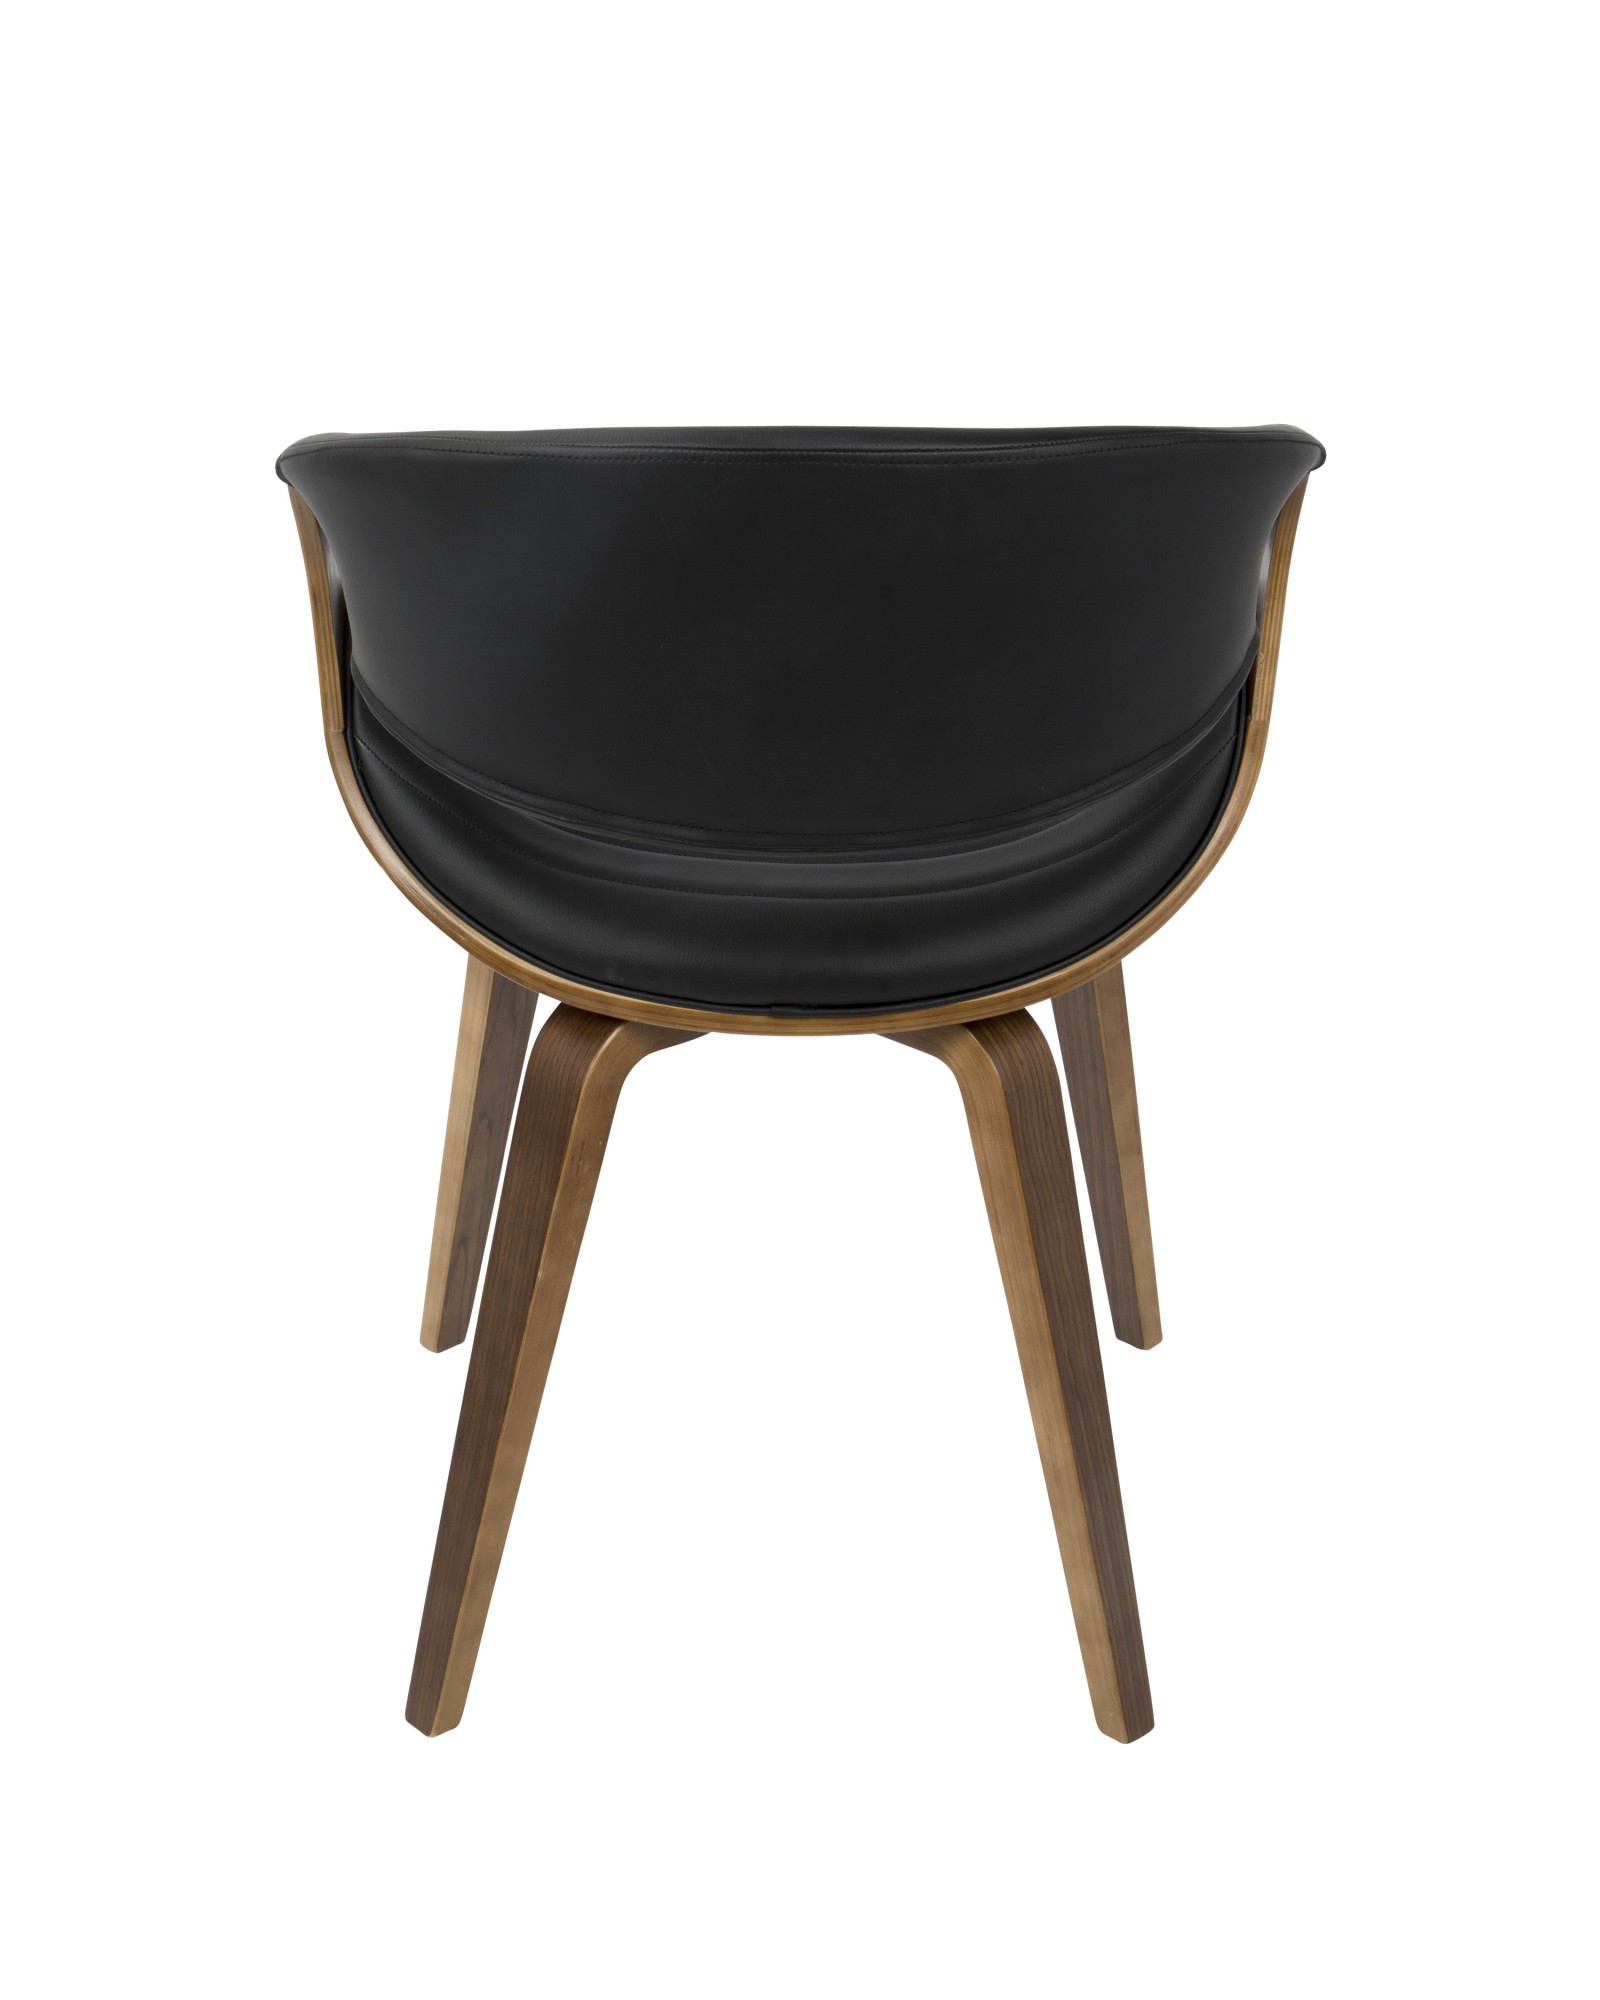 Symphony Mid-Century Modern Dining/Accent Chair in Walnut Wood and Black Faux Leather